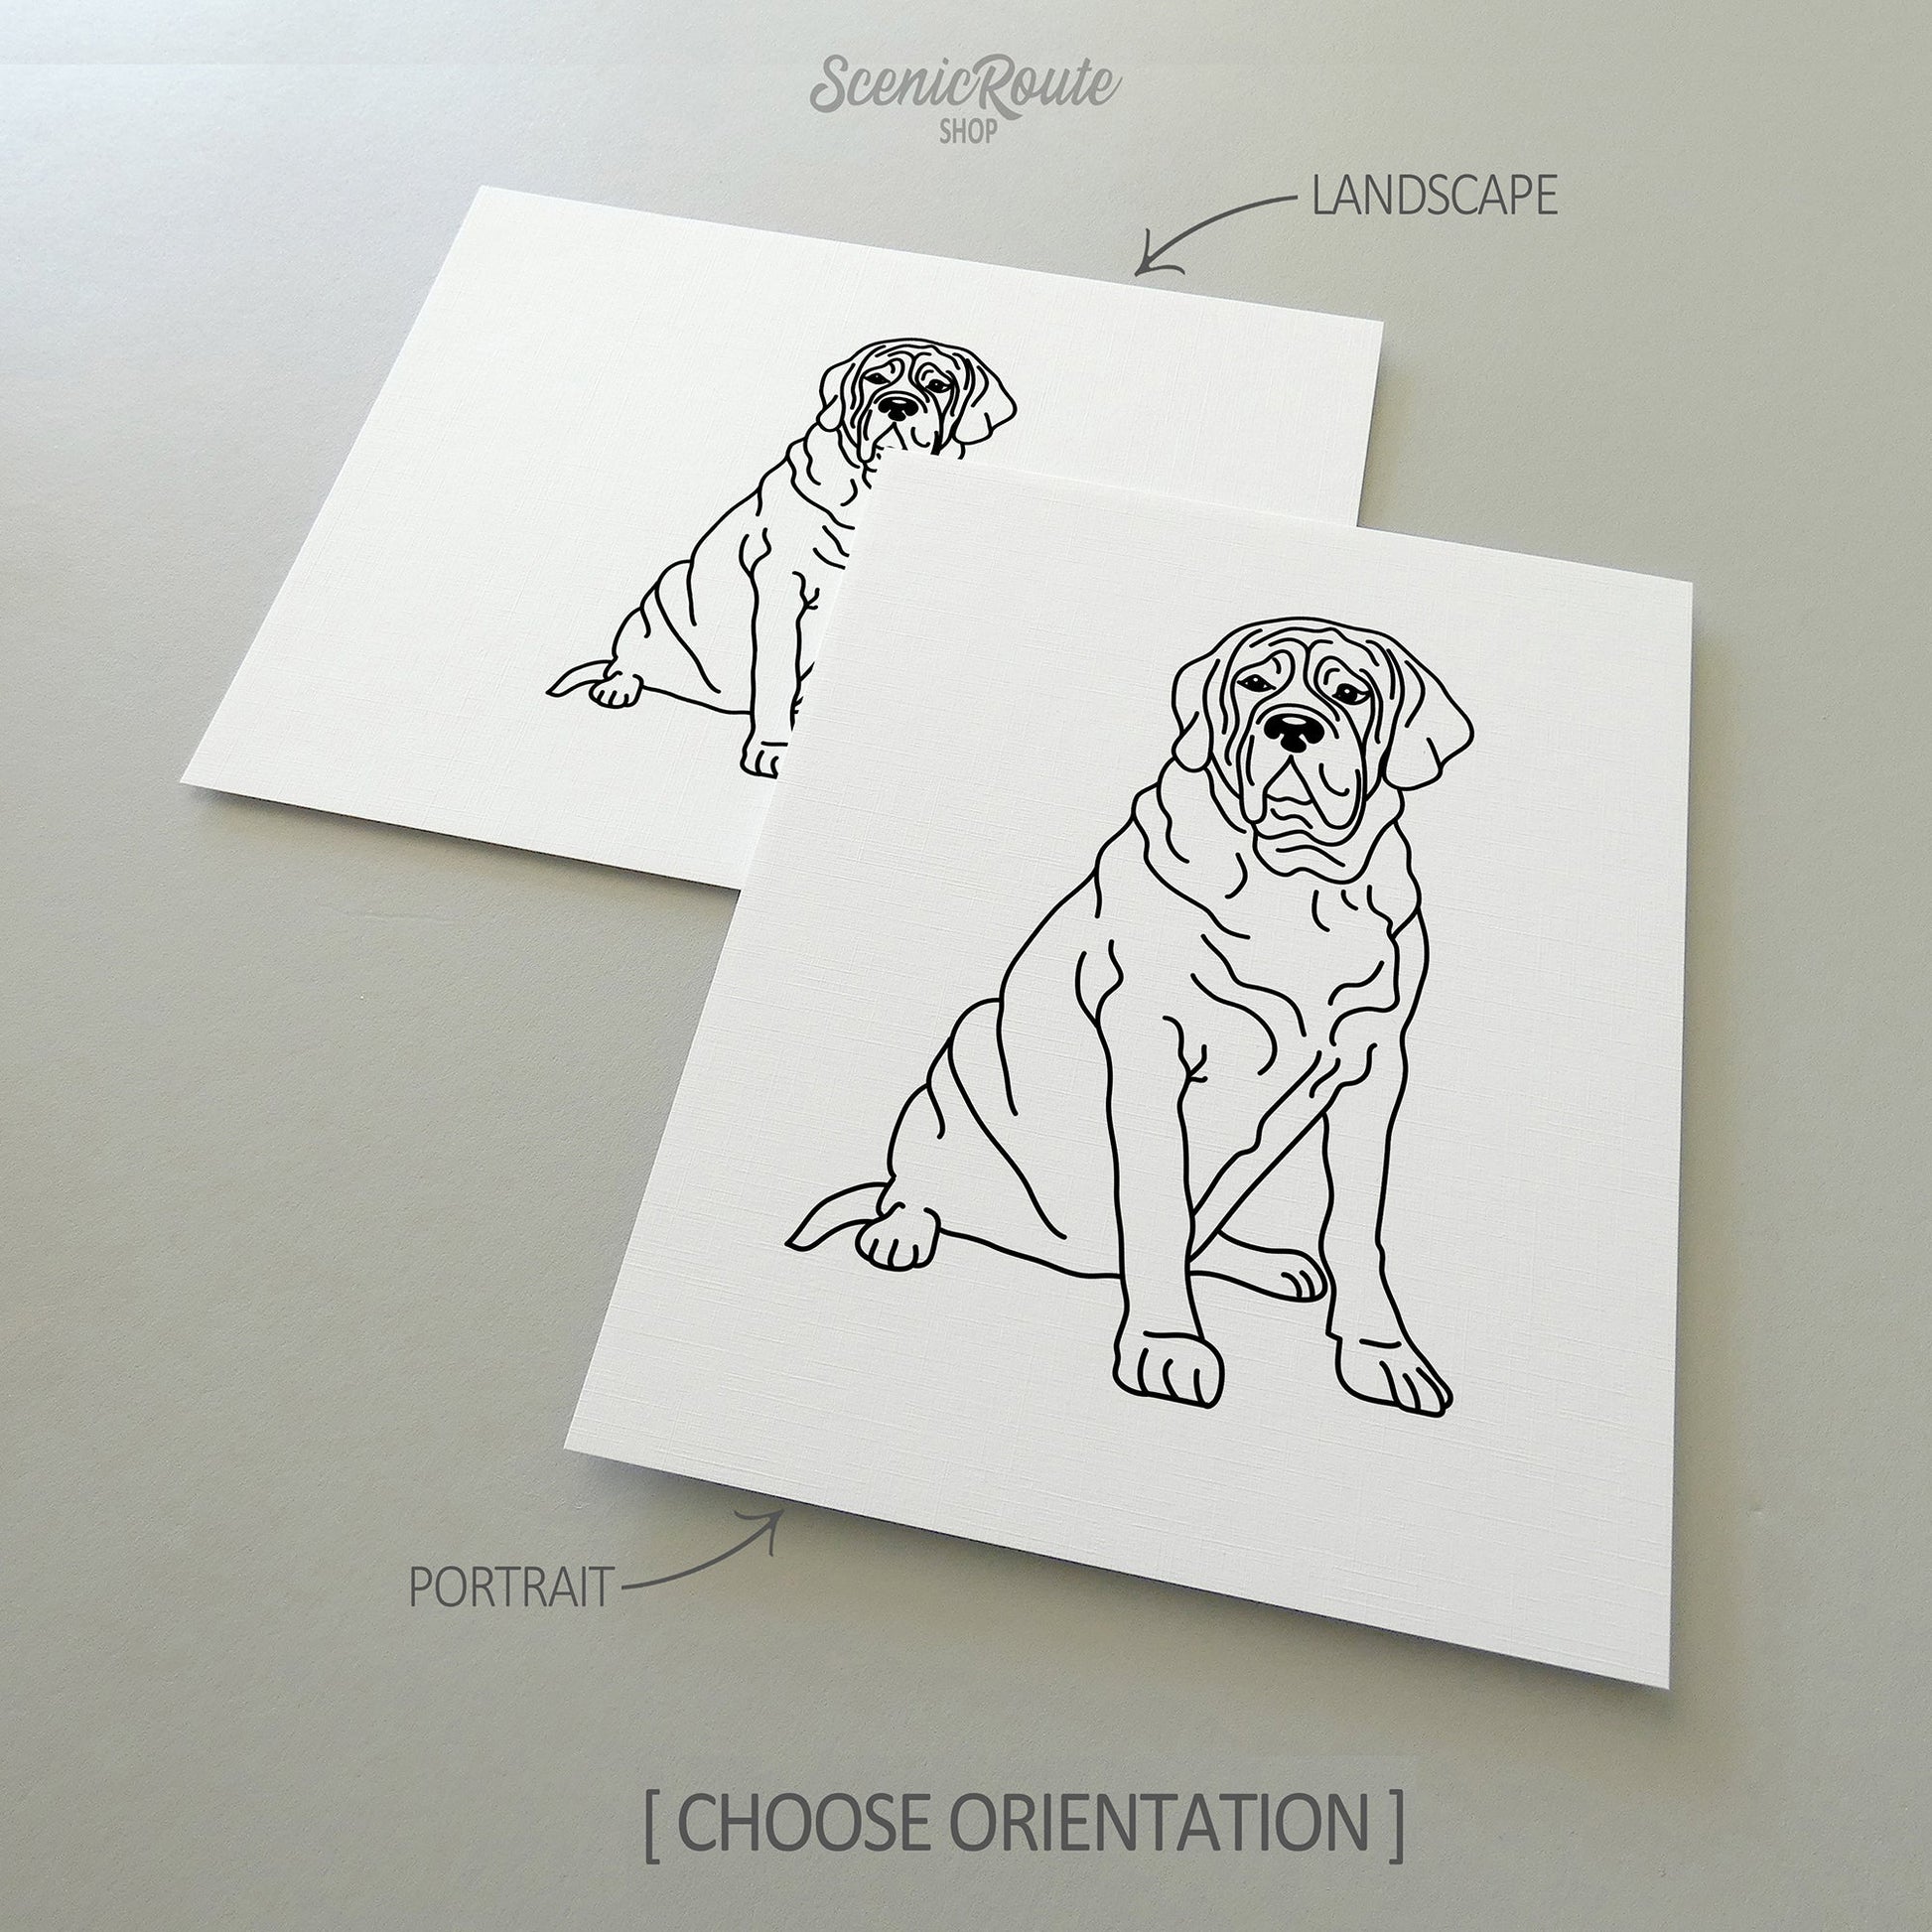 Two line art drawings of a Mastiff dog on white linen paper with a gray background.  The pieces are shown in portrait and landscape orientation for the available art print options.